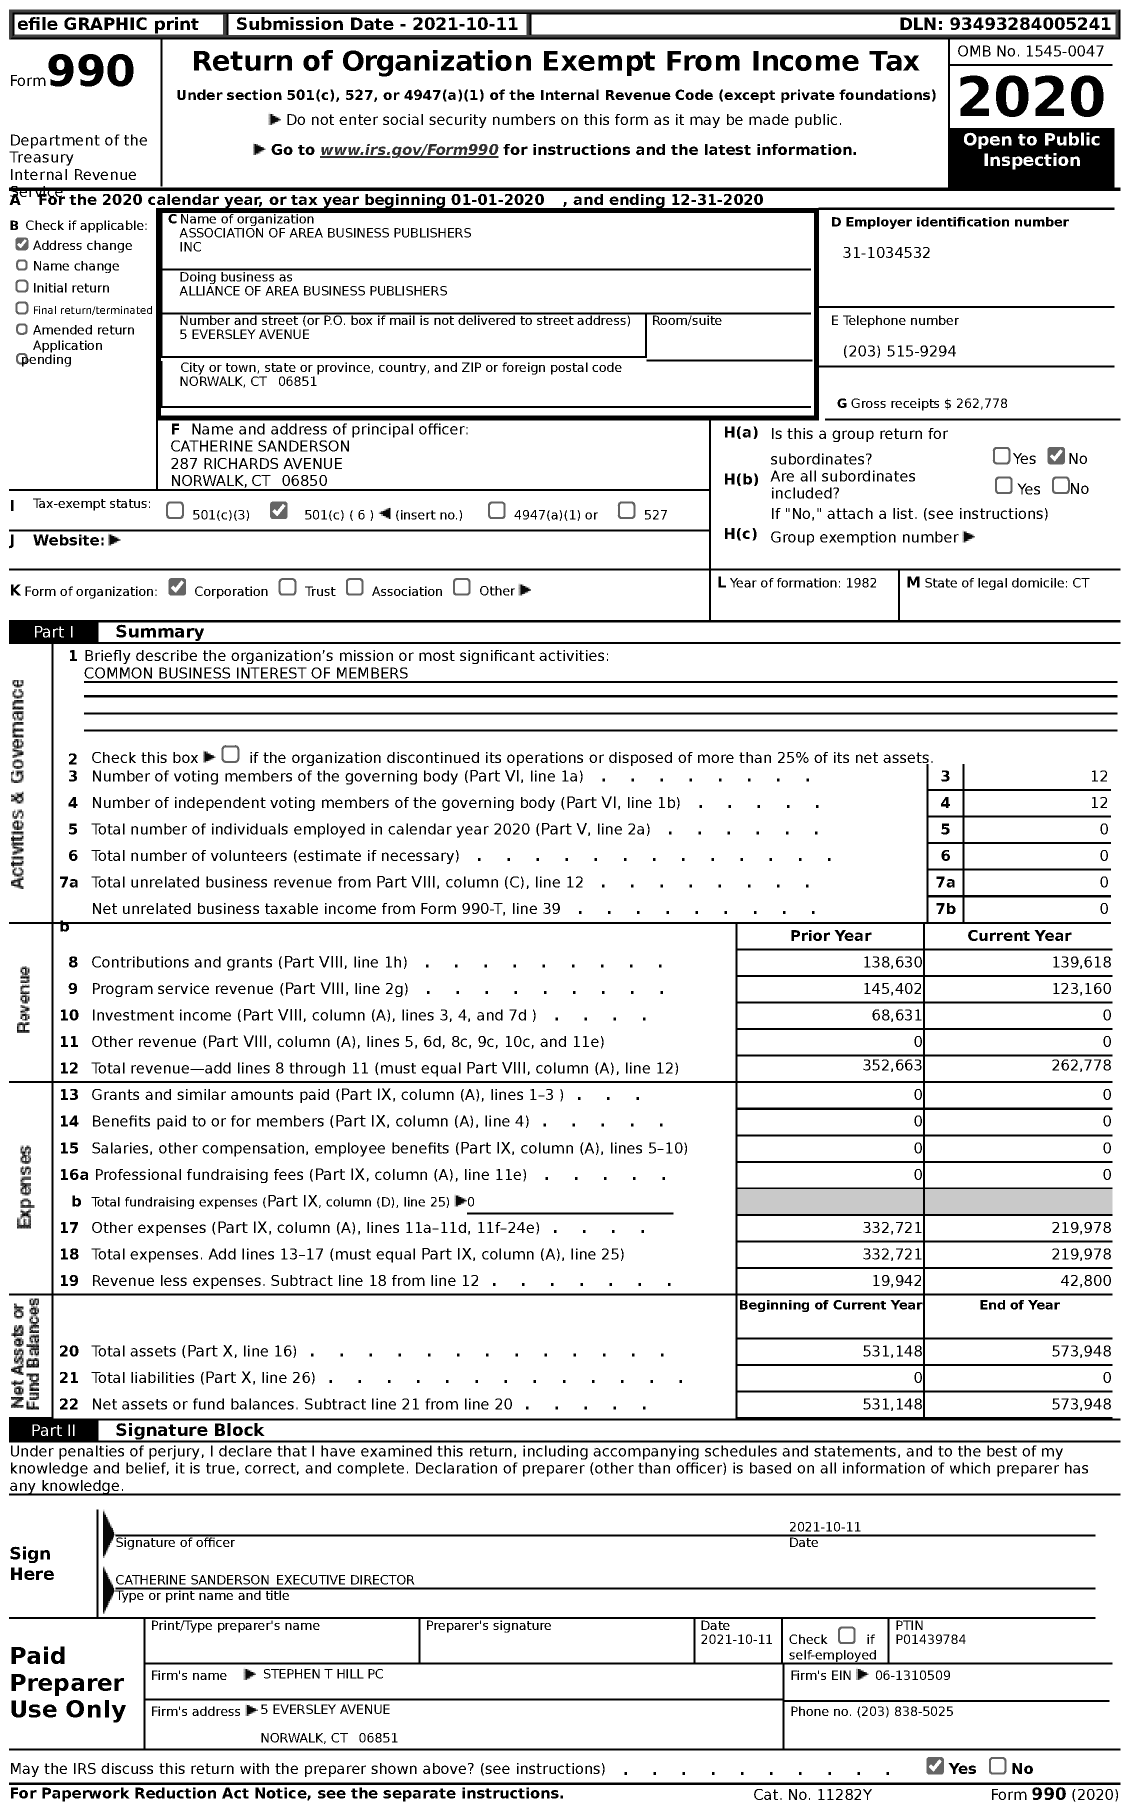 Image of first page of 2020 Form 990 for Alliance of Area Business Publishers (AABP)